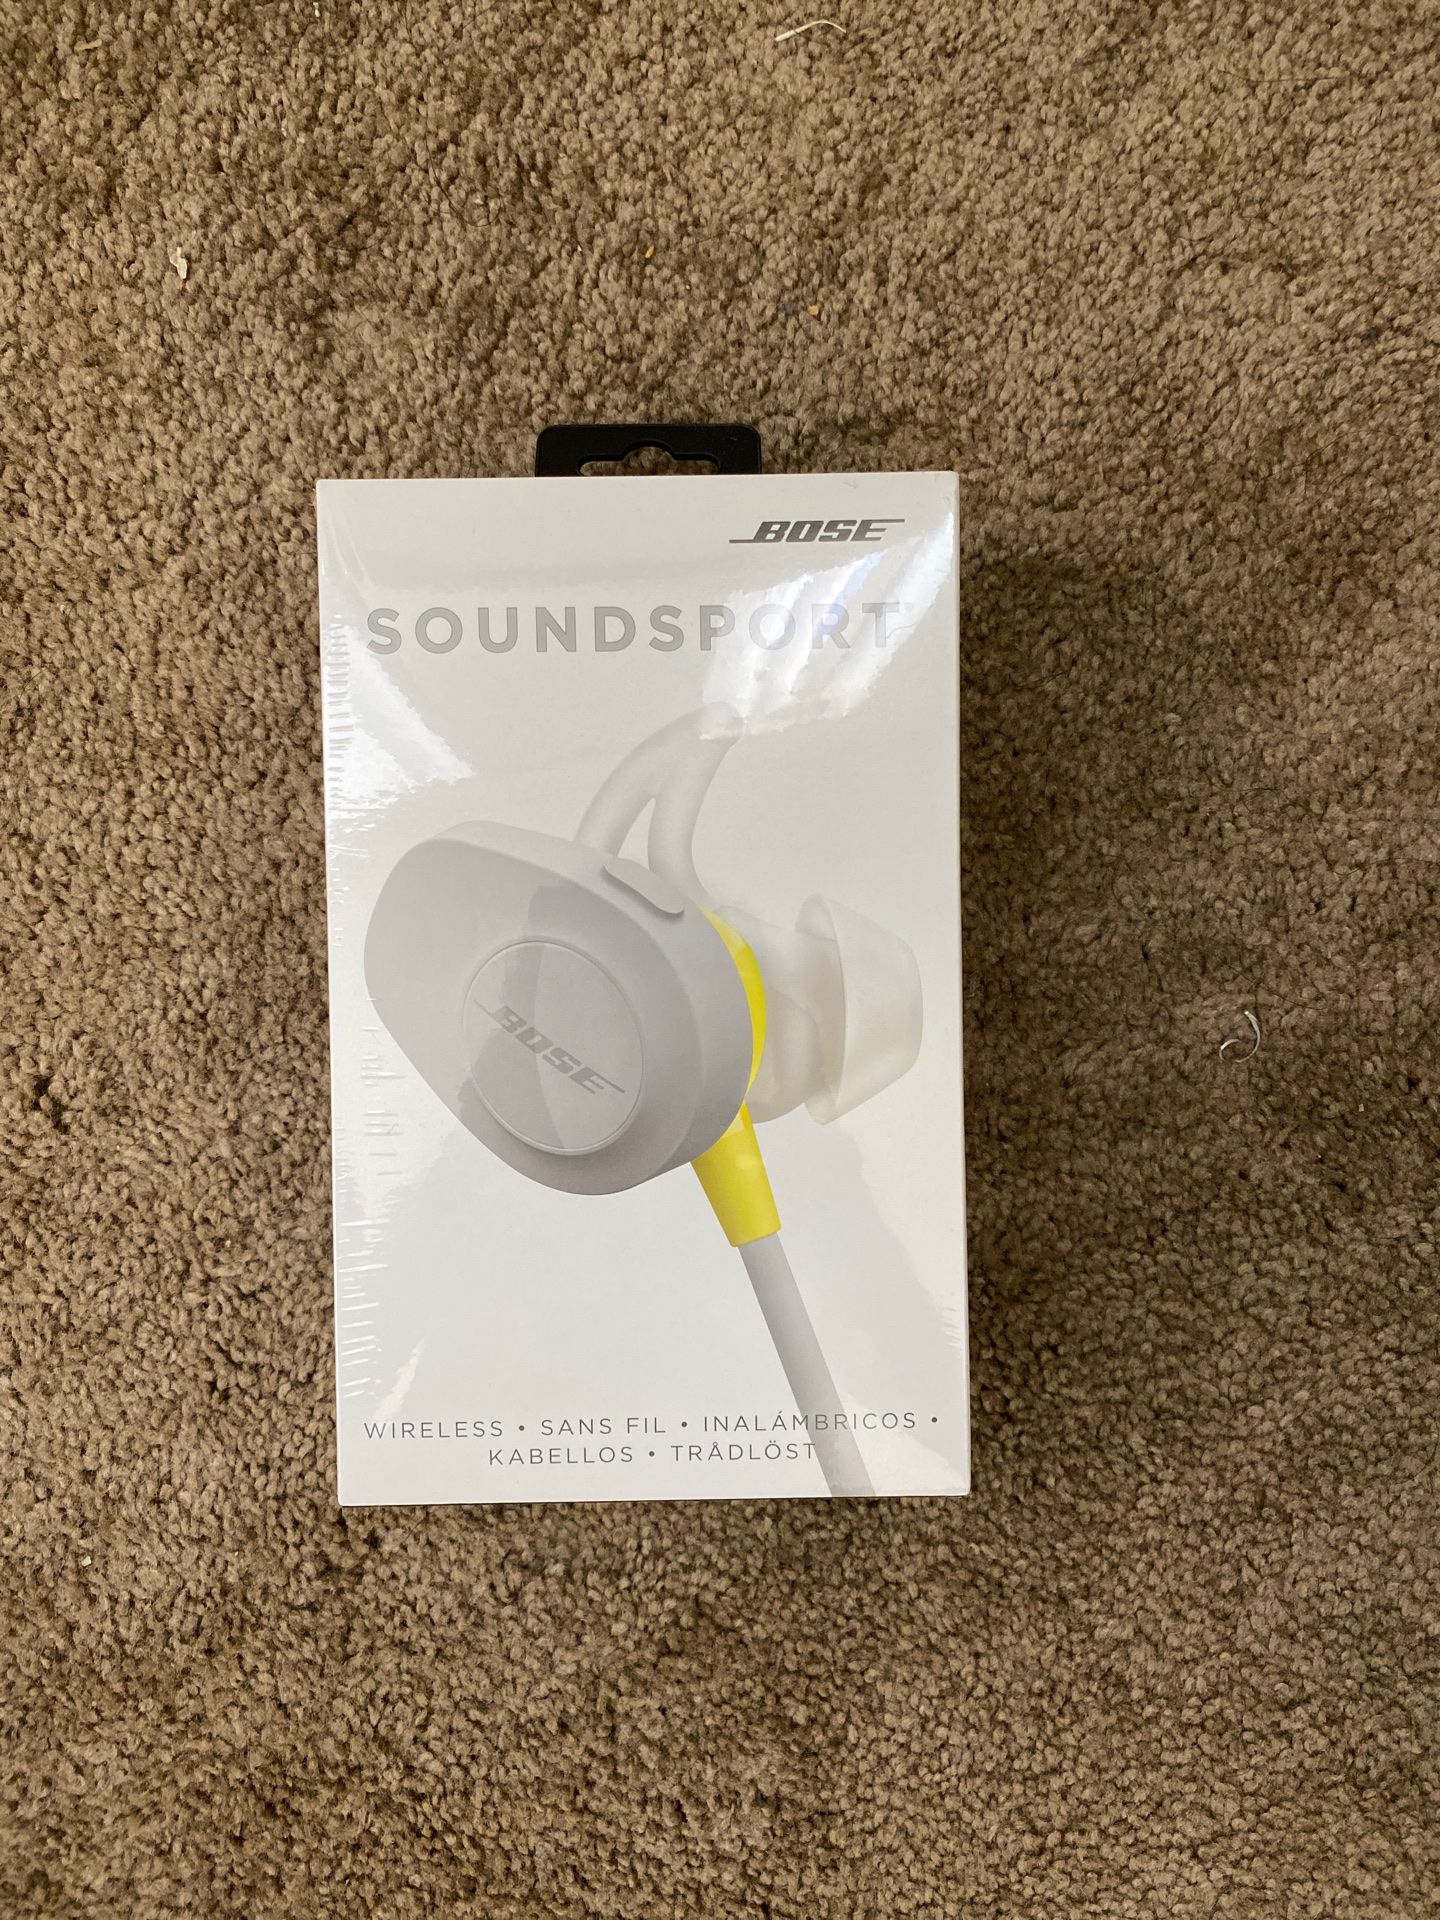 Bose sound-sport sealed never used bluetooth